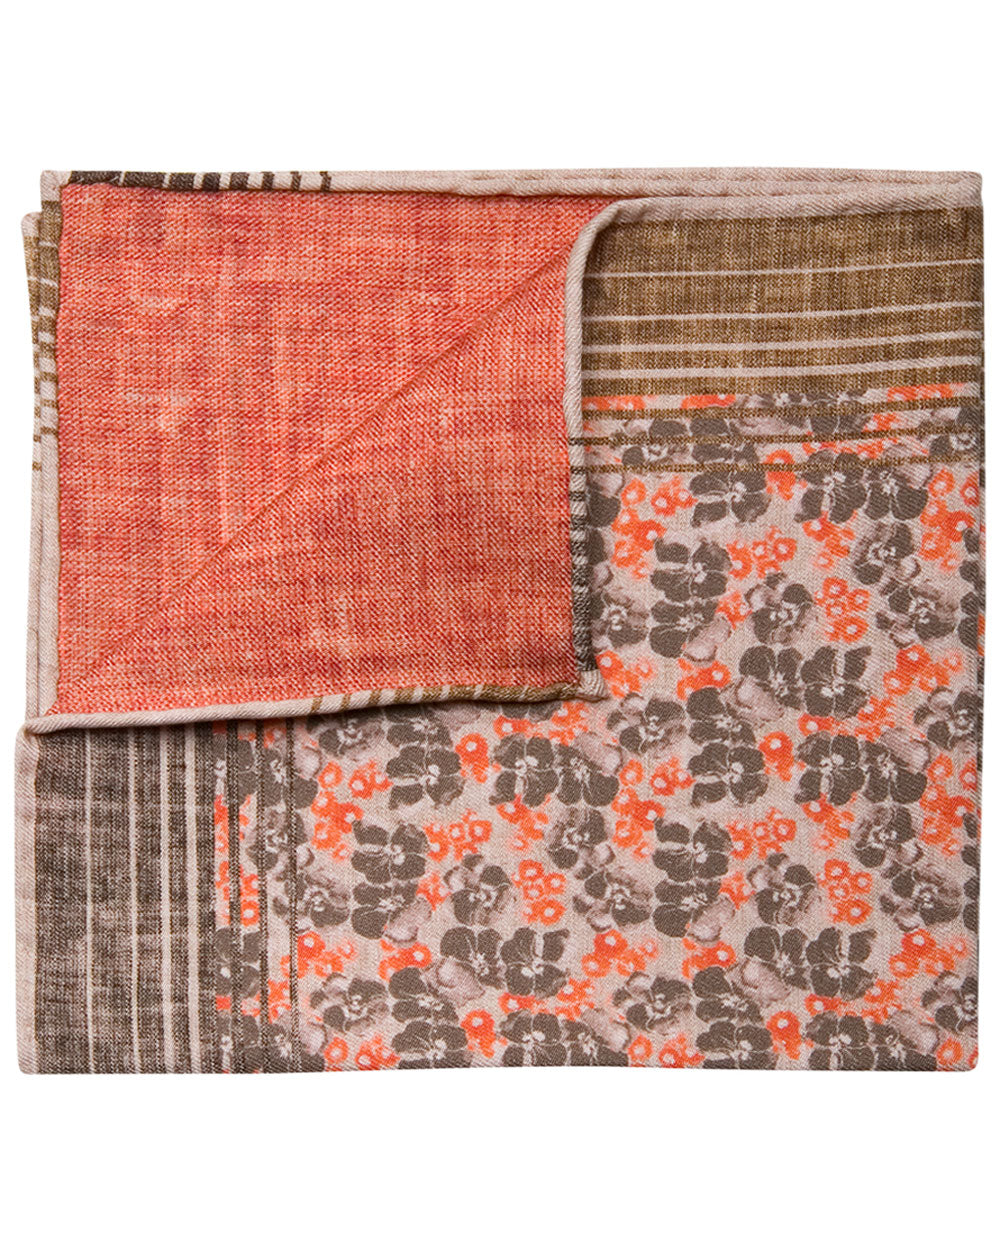 Abstract Floral Pocket Square in Brown and Orange